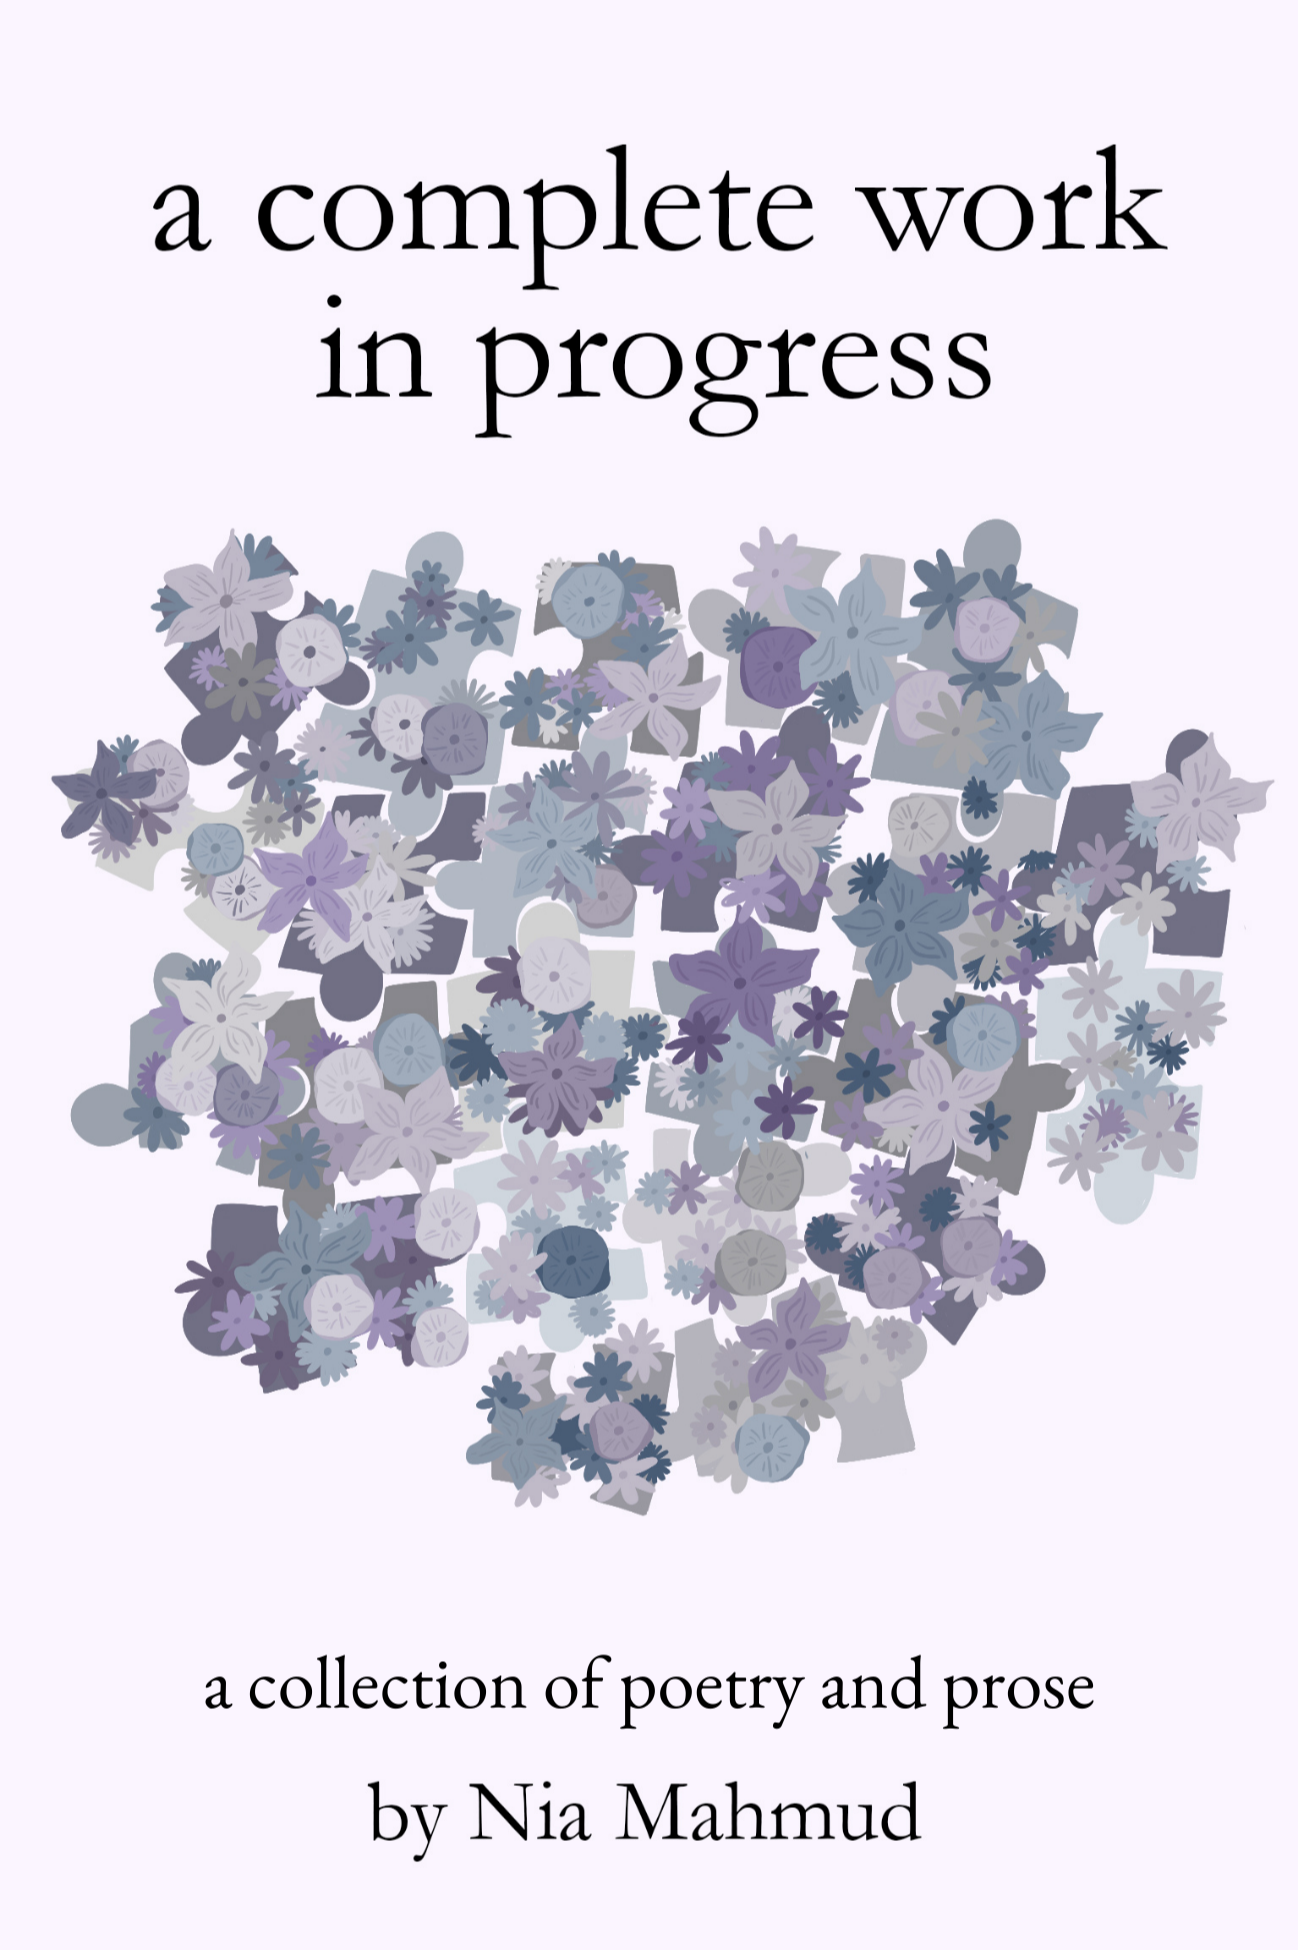 Book cover of a complete work in progress by Nia Mahmud